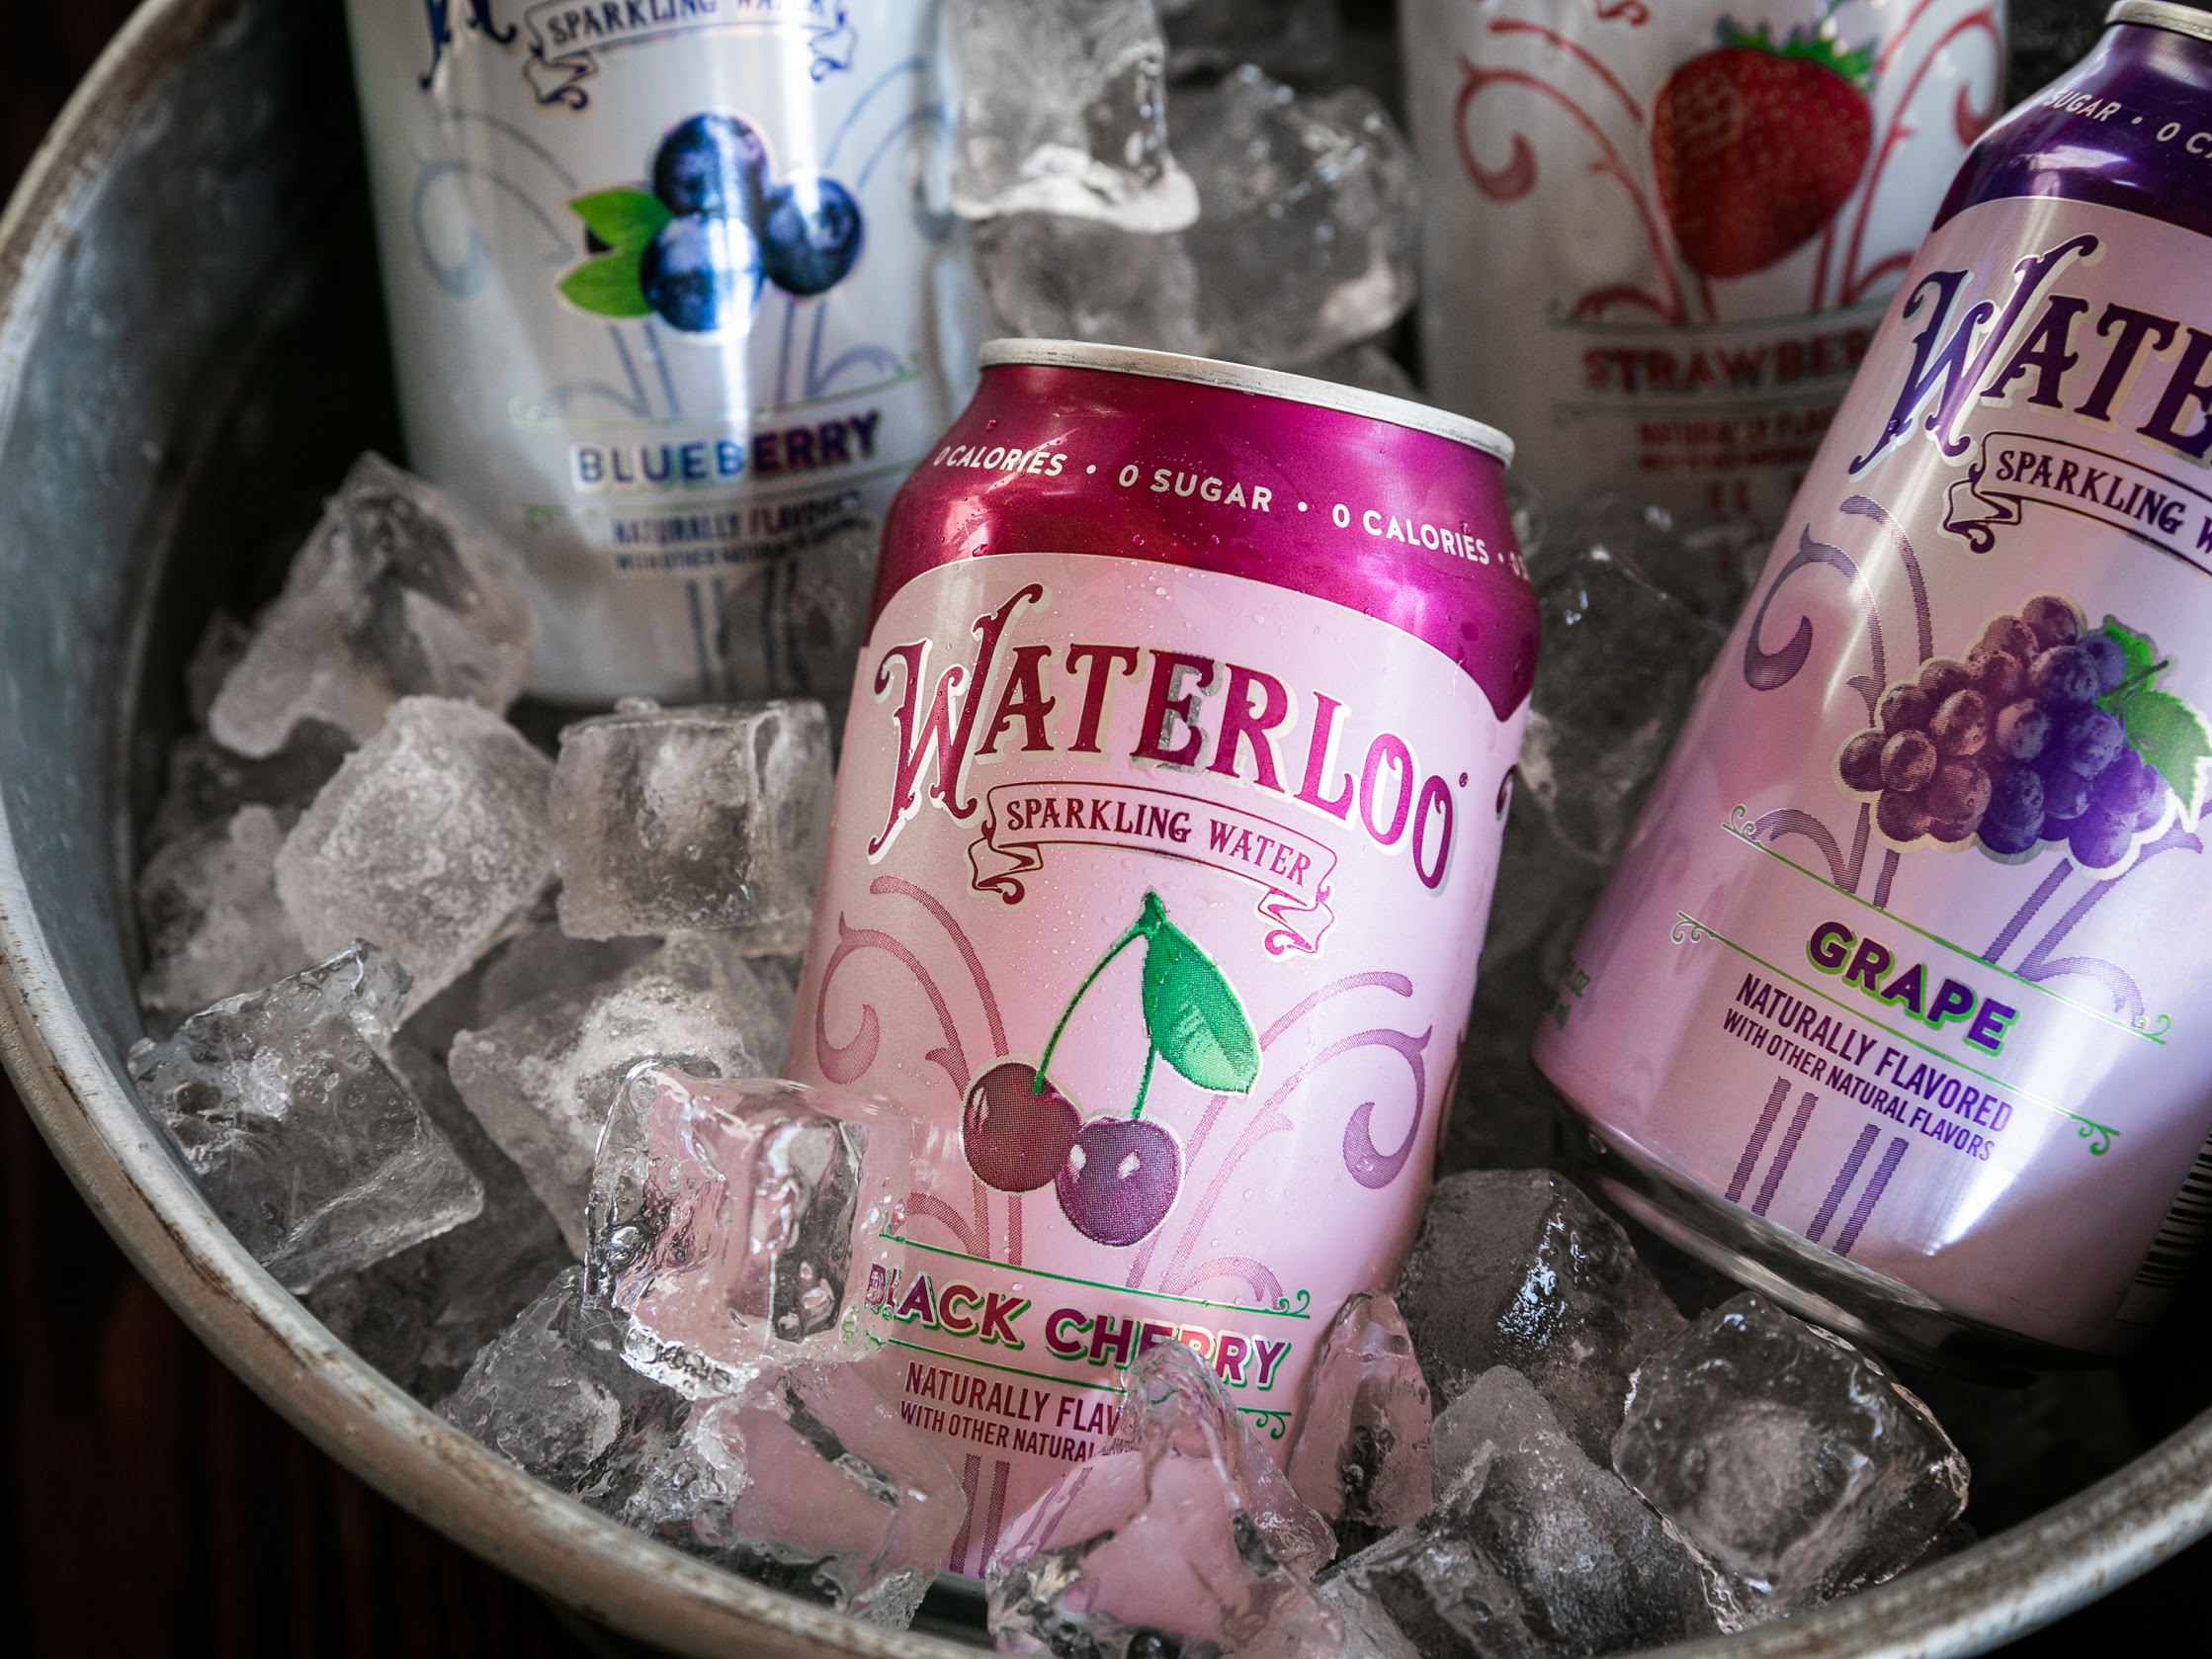 High Value Coupon Means A Great Deal On Waterloo Sparkling Water At Publix on I Heart Publix 3